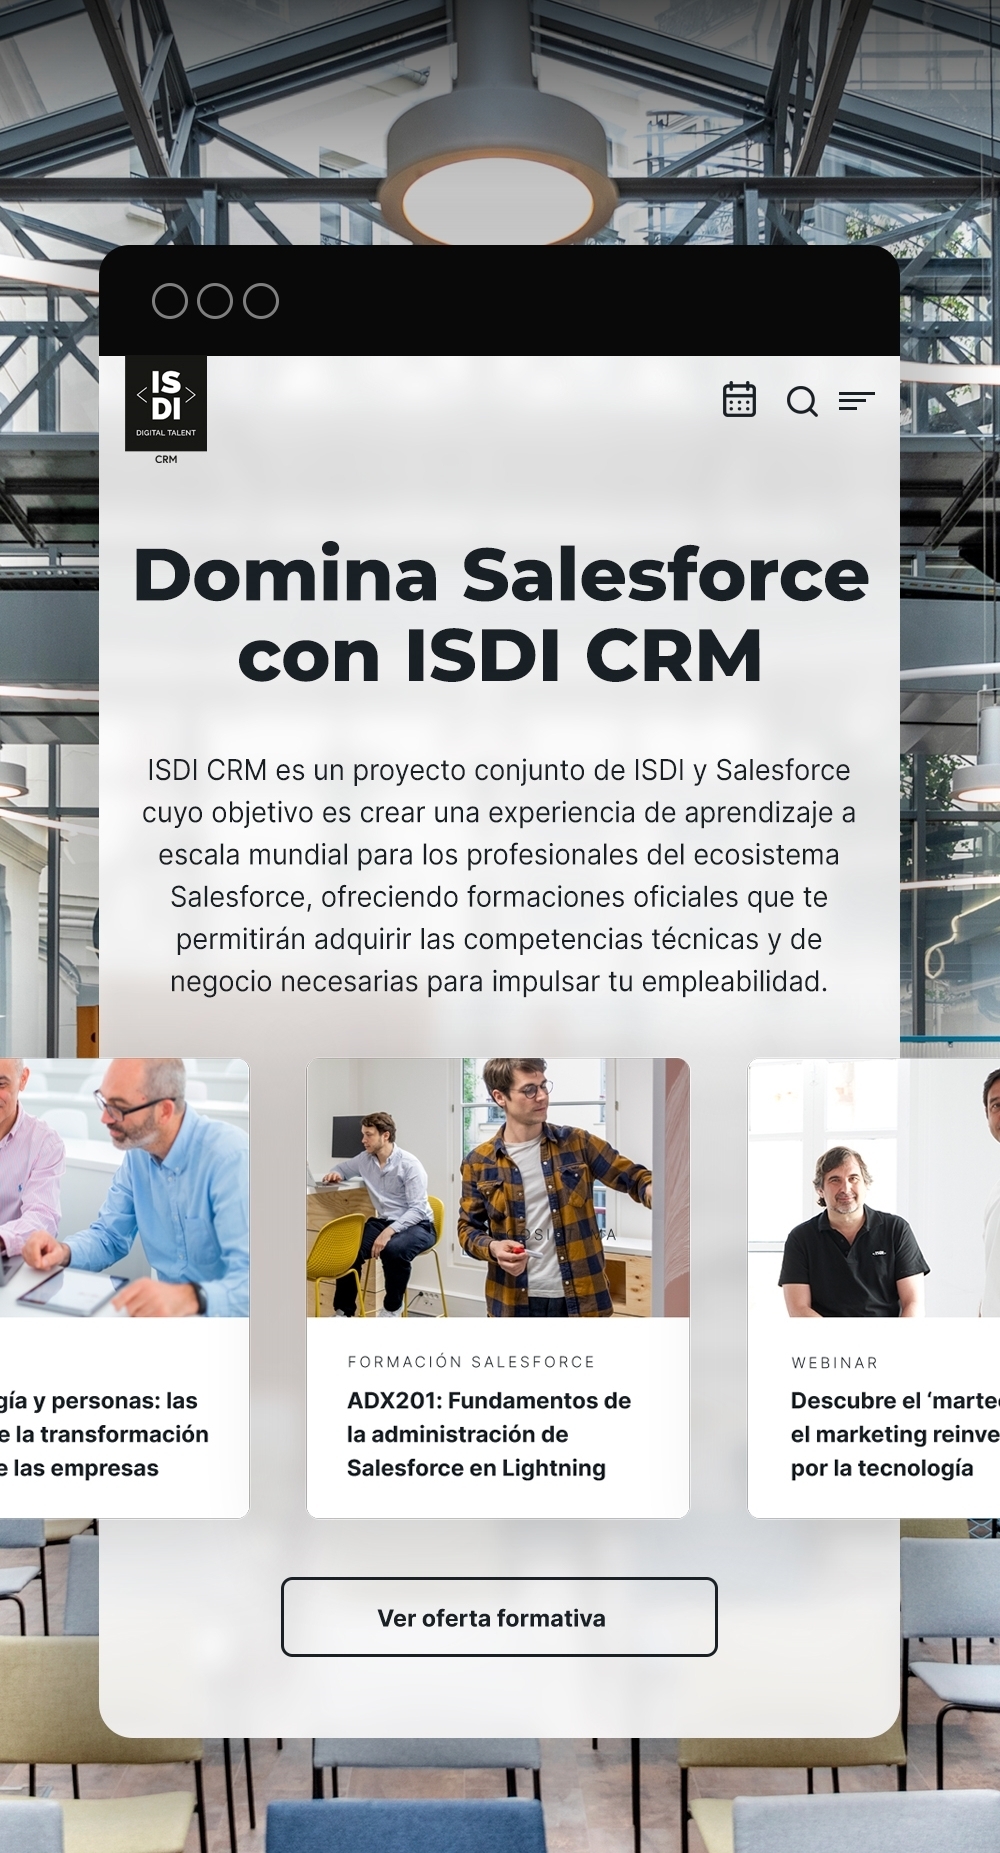 ISDI CRM is a company specialized in Salesforce training, one of the most popular CRMs in the world.